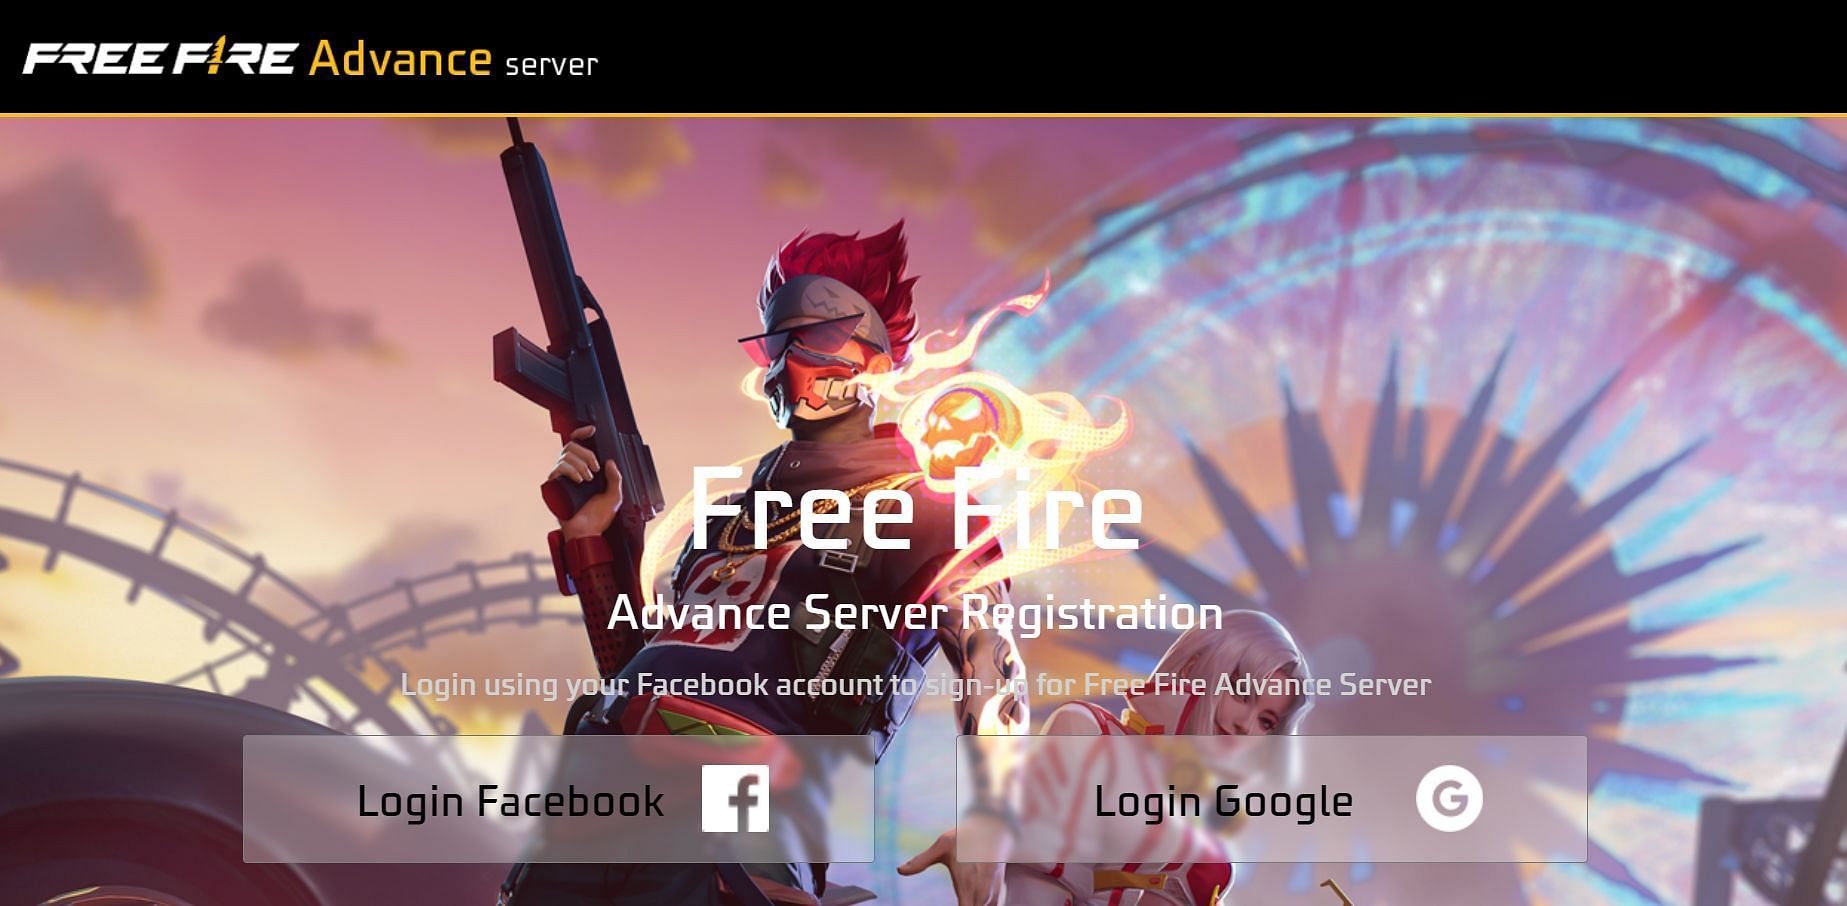 You can complete the login (Image via Garena)